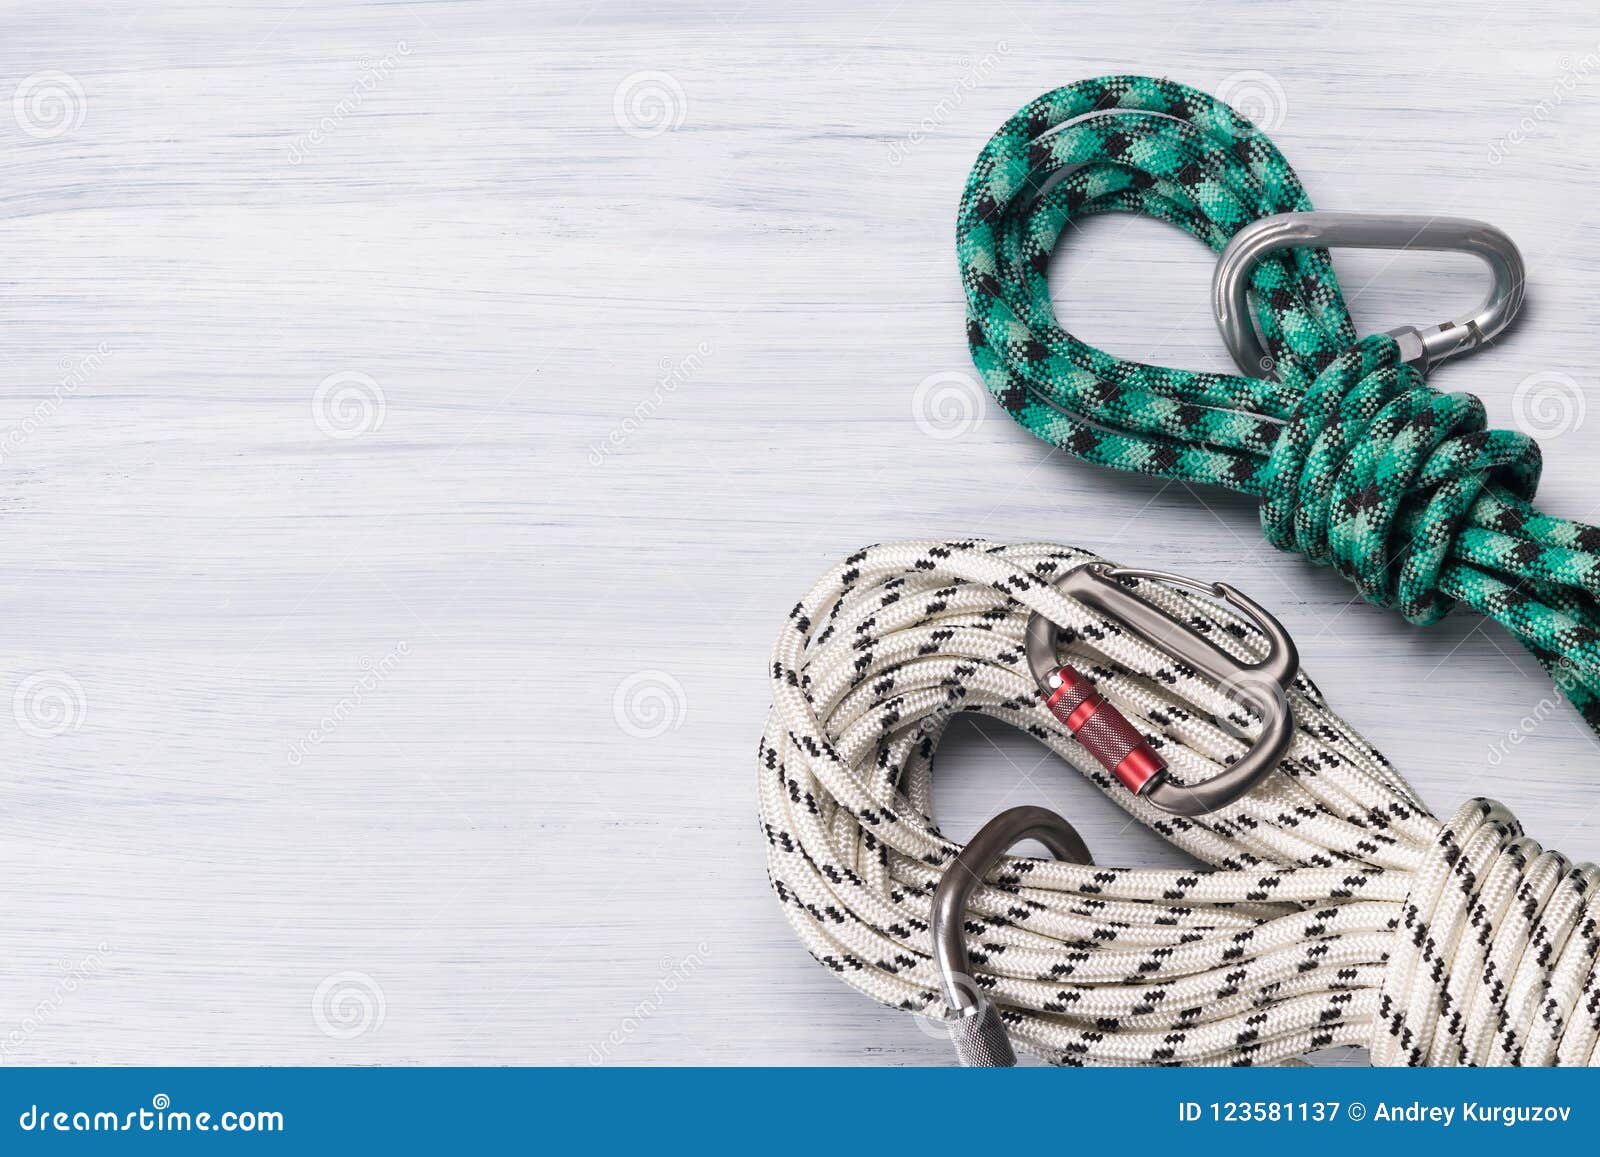 https://thumbs.dreamstime.com/z/safety-ropes-snap-hooks-climbing-light-background-safety-ropes-snap-hooks-climbing-light-background-123581137.jpg